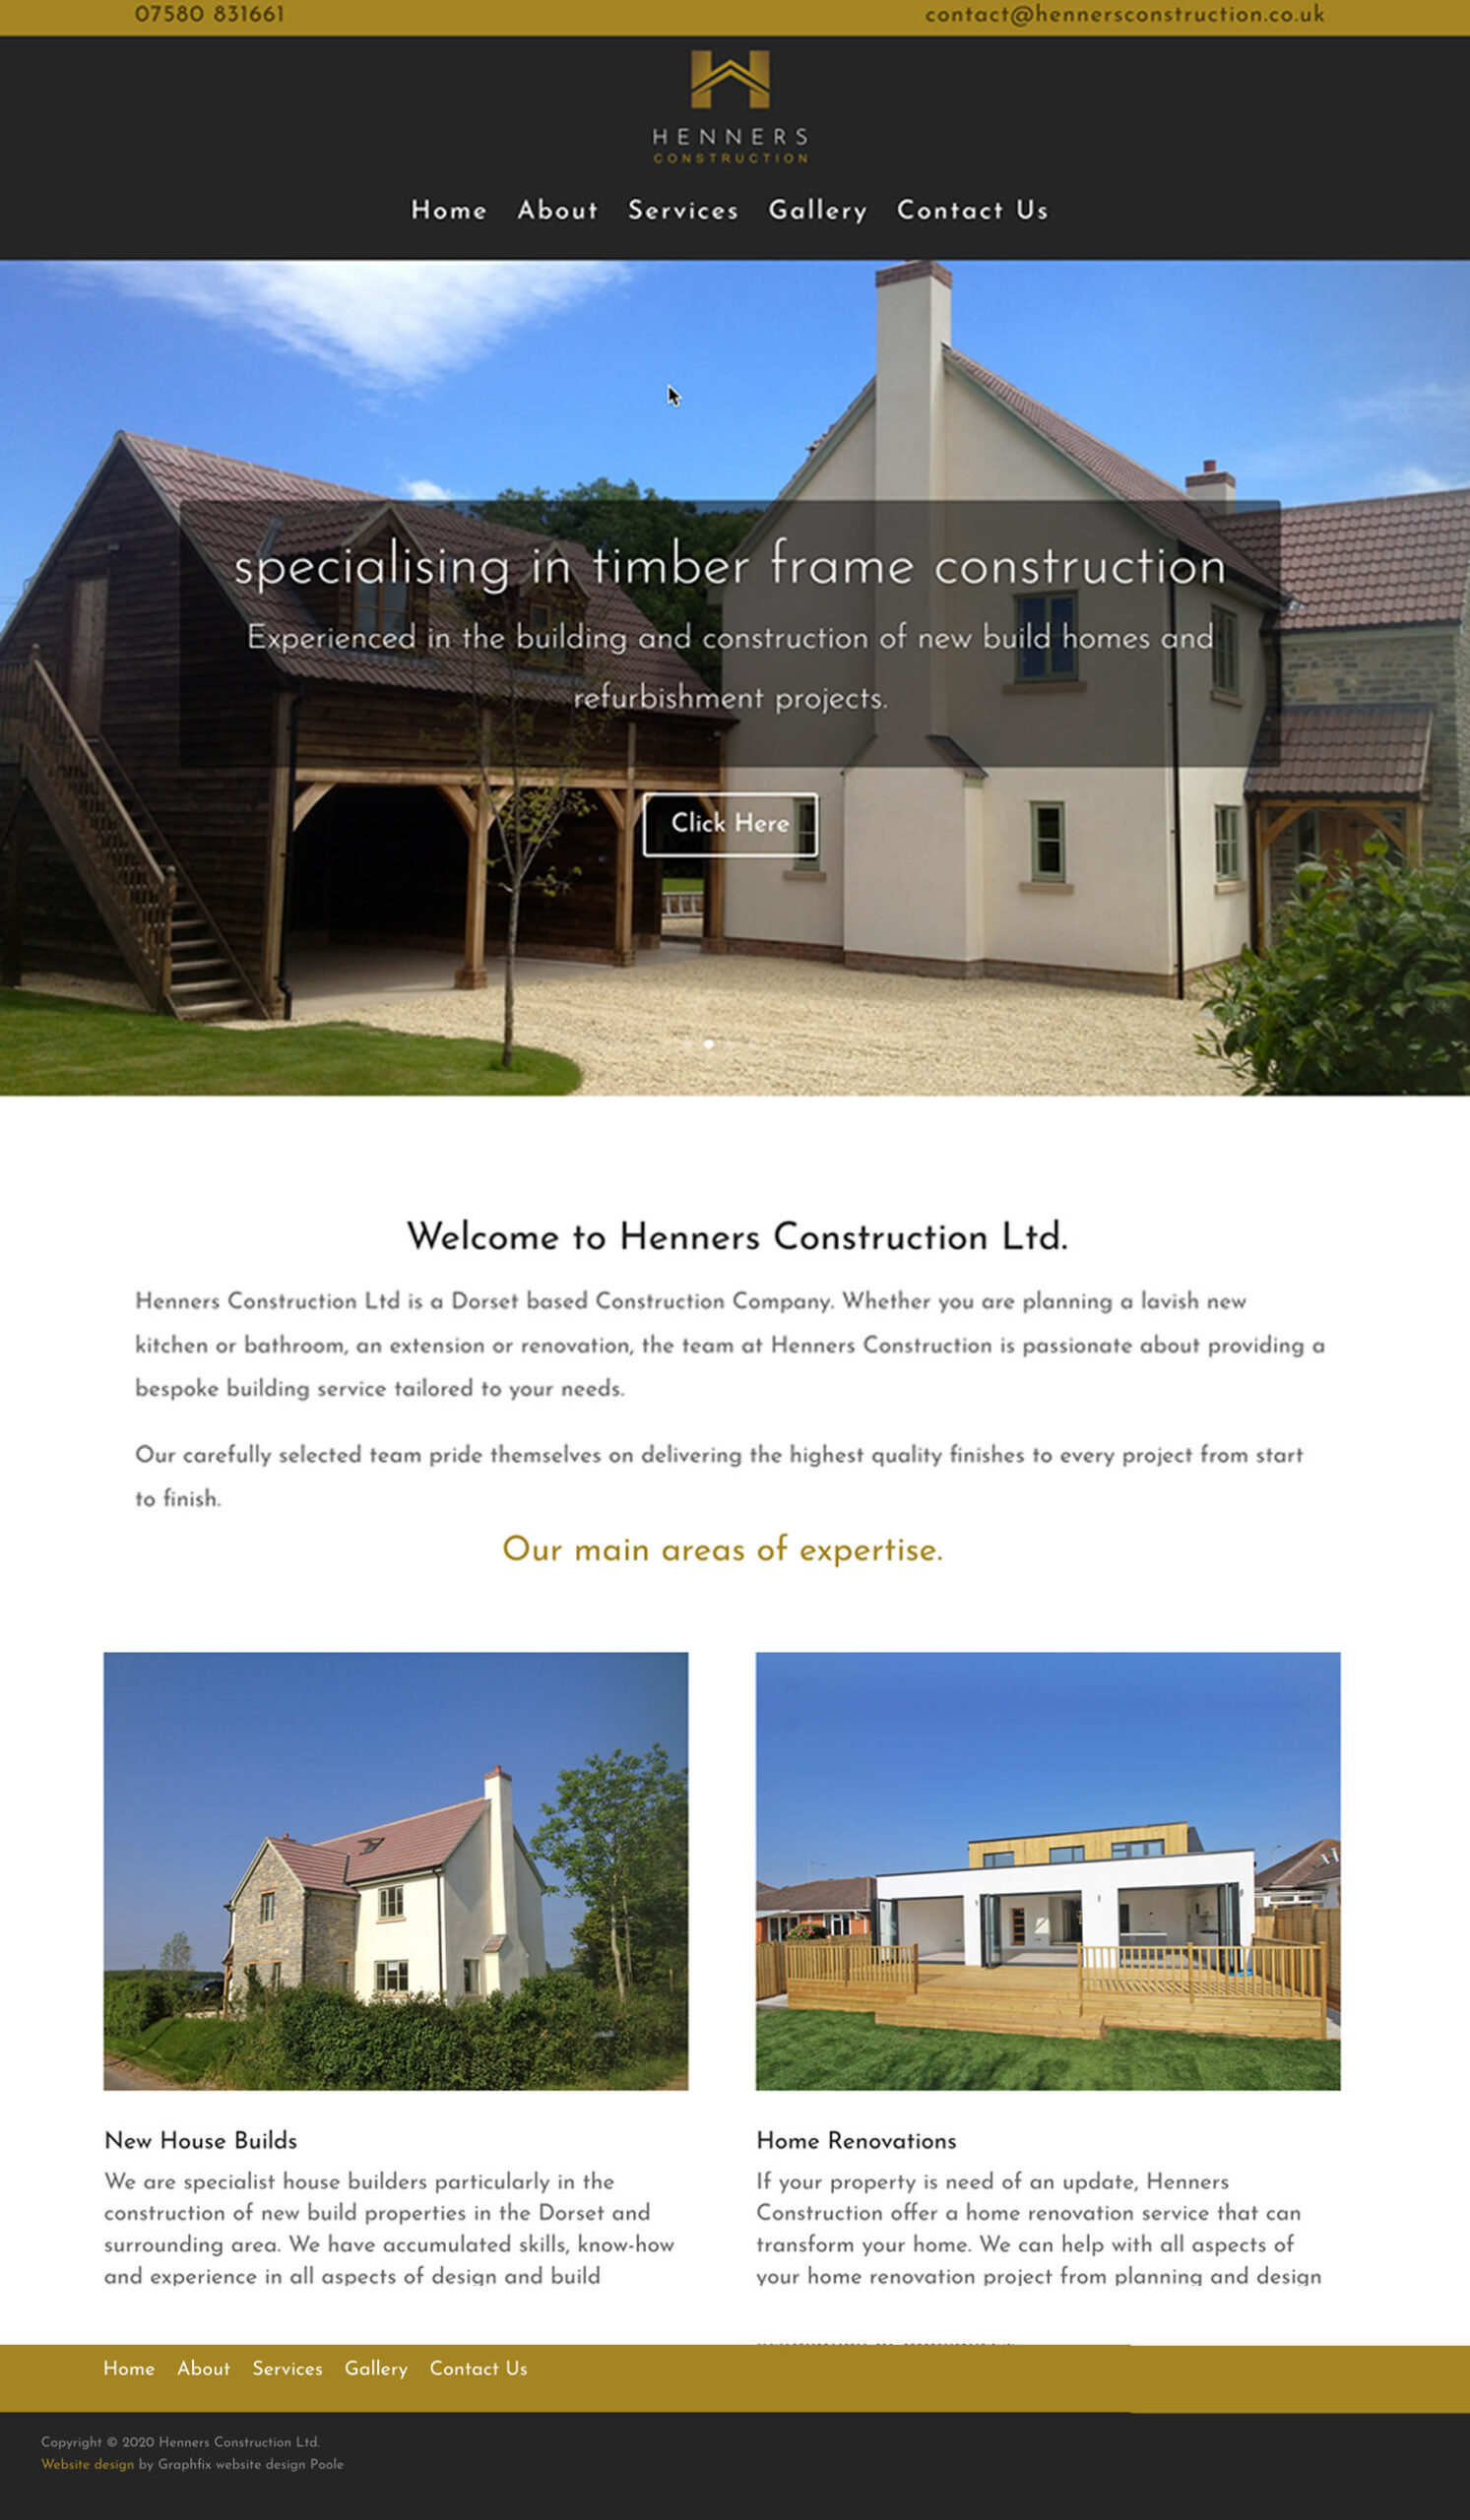 Website designed and create for Henners Construction based in Dorset